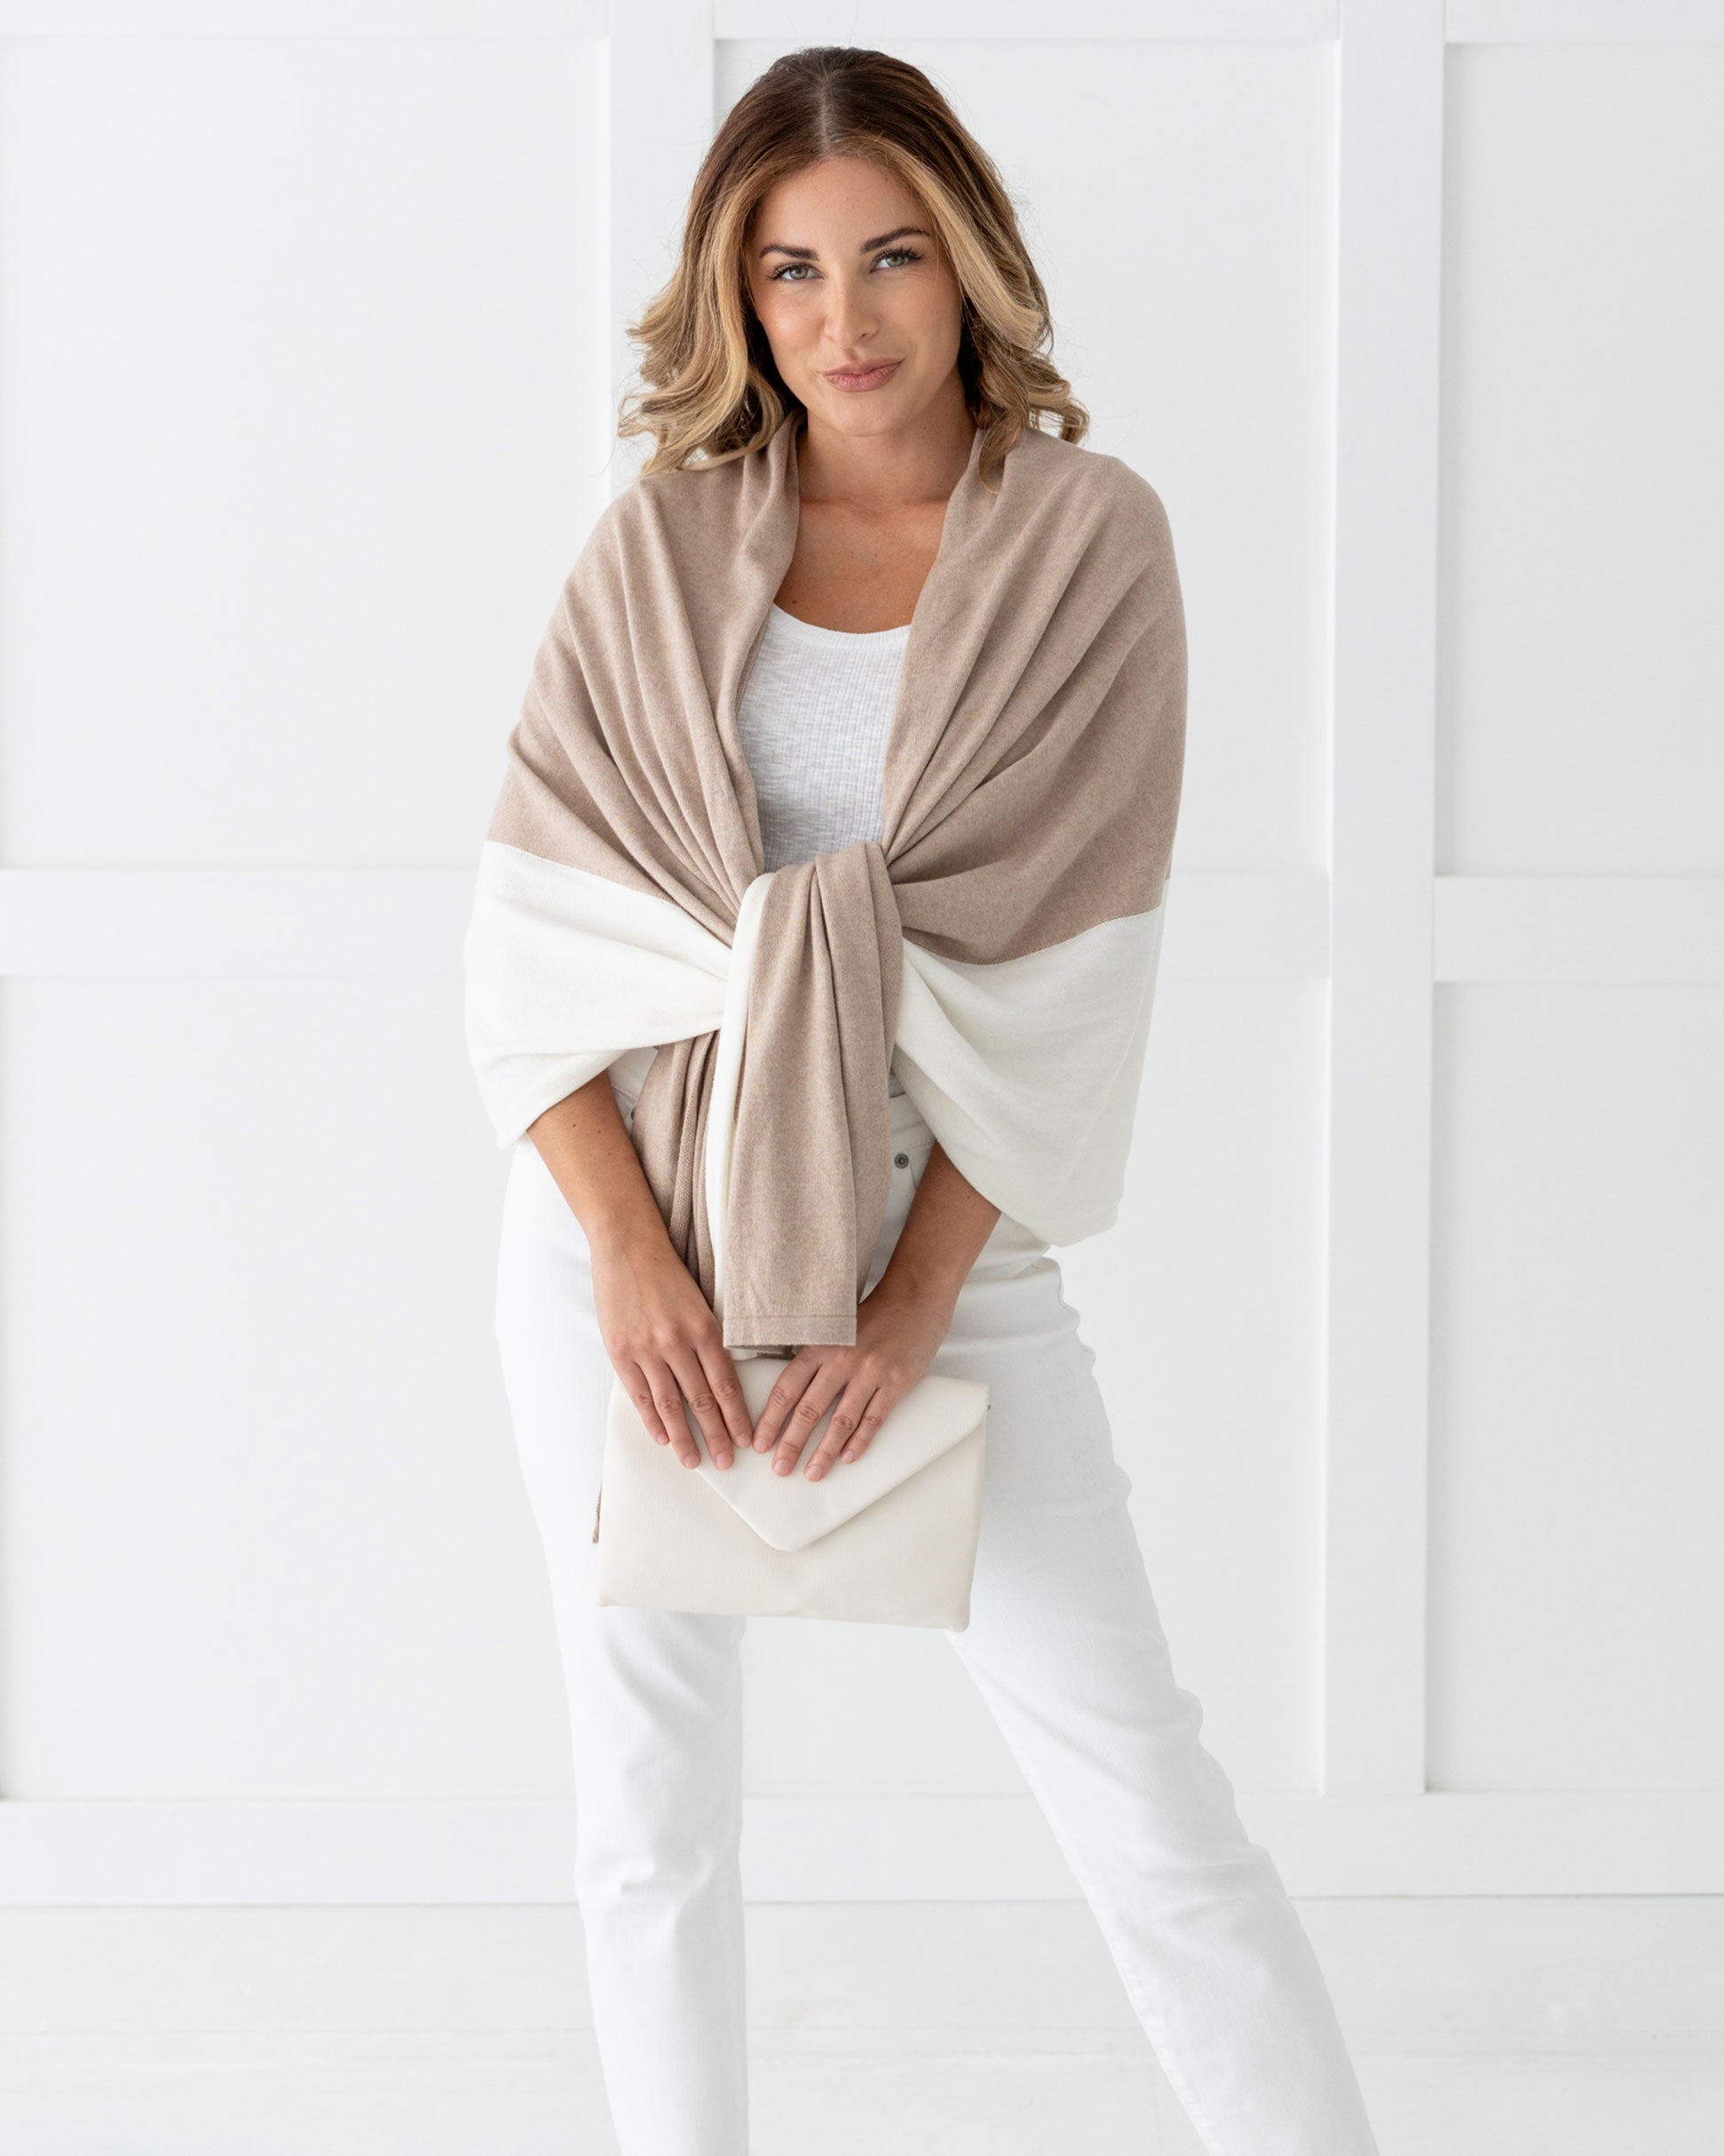 Woman wearing the Cashmere Cotton Luxe Travel Scarf in Sandstone and Ivory Colorblock which is a tan and cream scarf